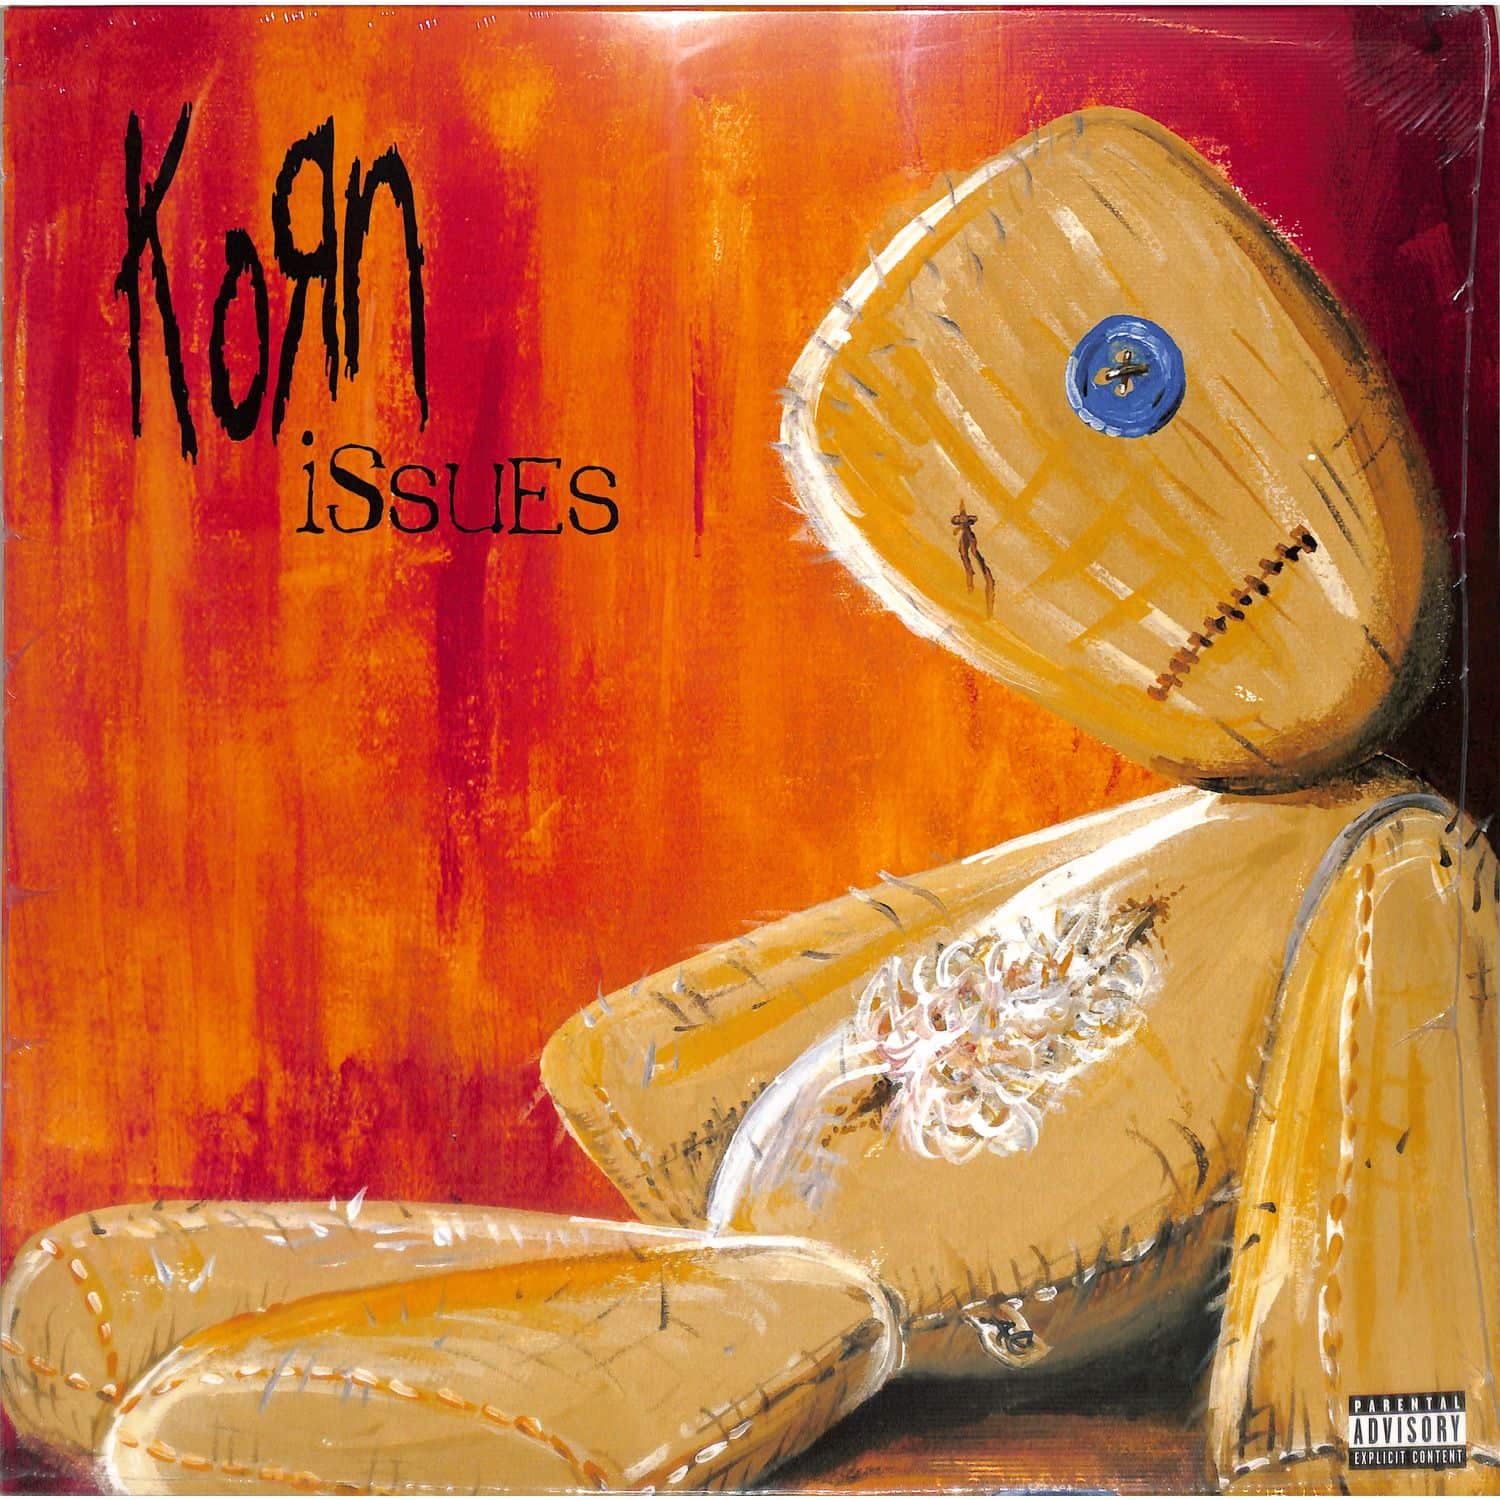 Korn - ISSUES 